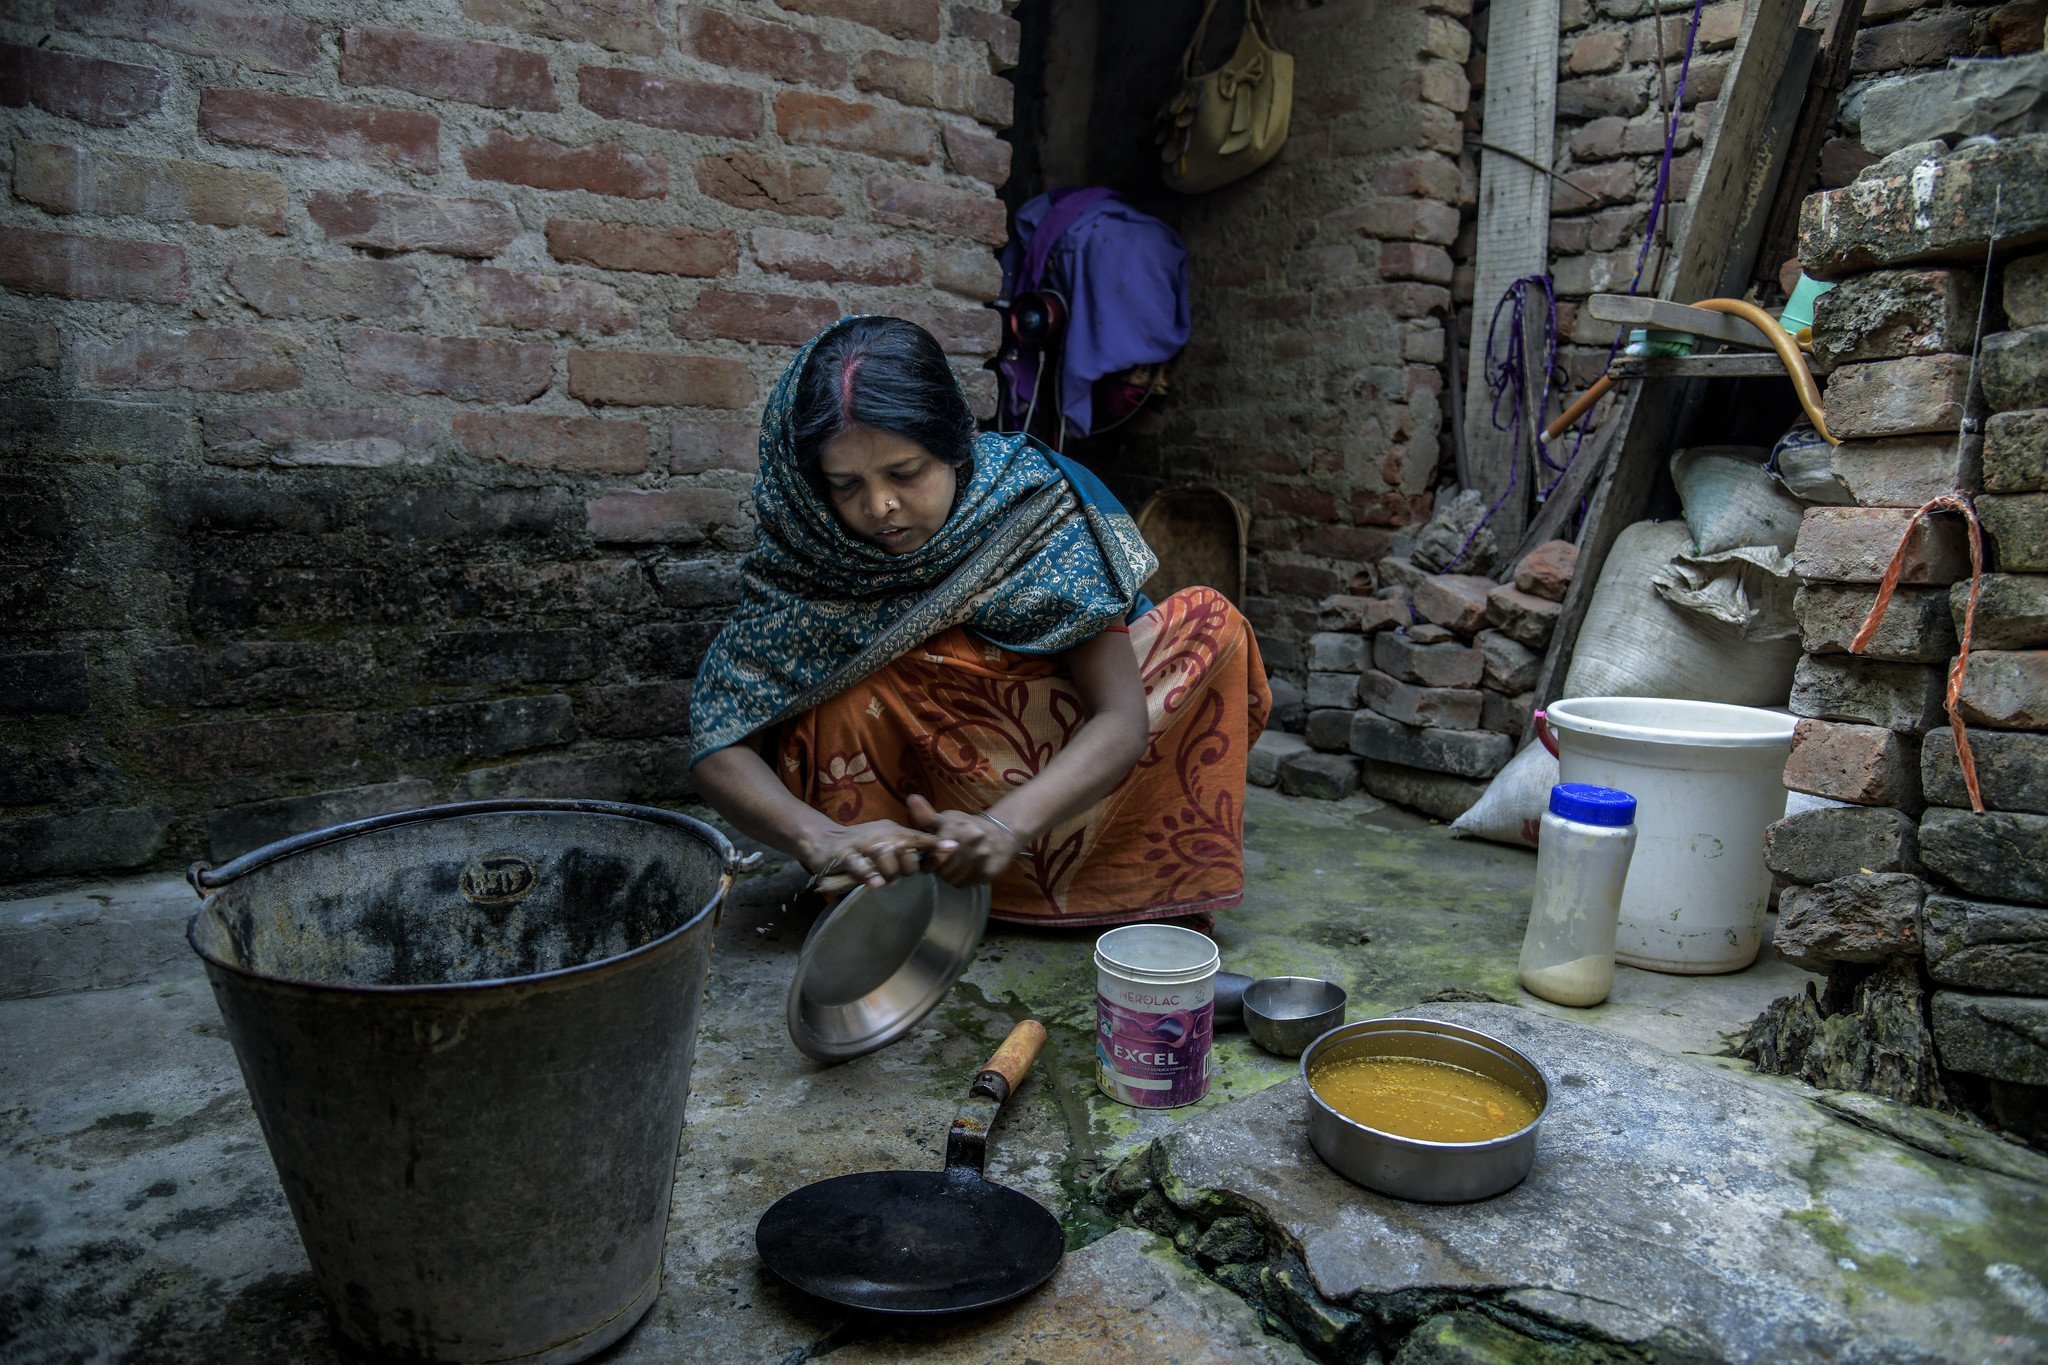 High rents in cities like Mumbai and New Delhi have forced poor people into crowded and cramped living spaces where they share communal toilets and water facilities, leaving them at greater risk of contracting COVID-19. 